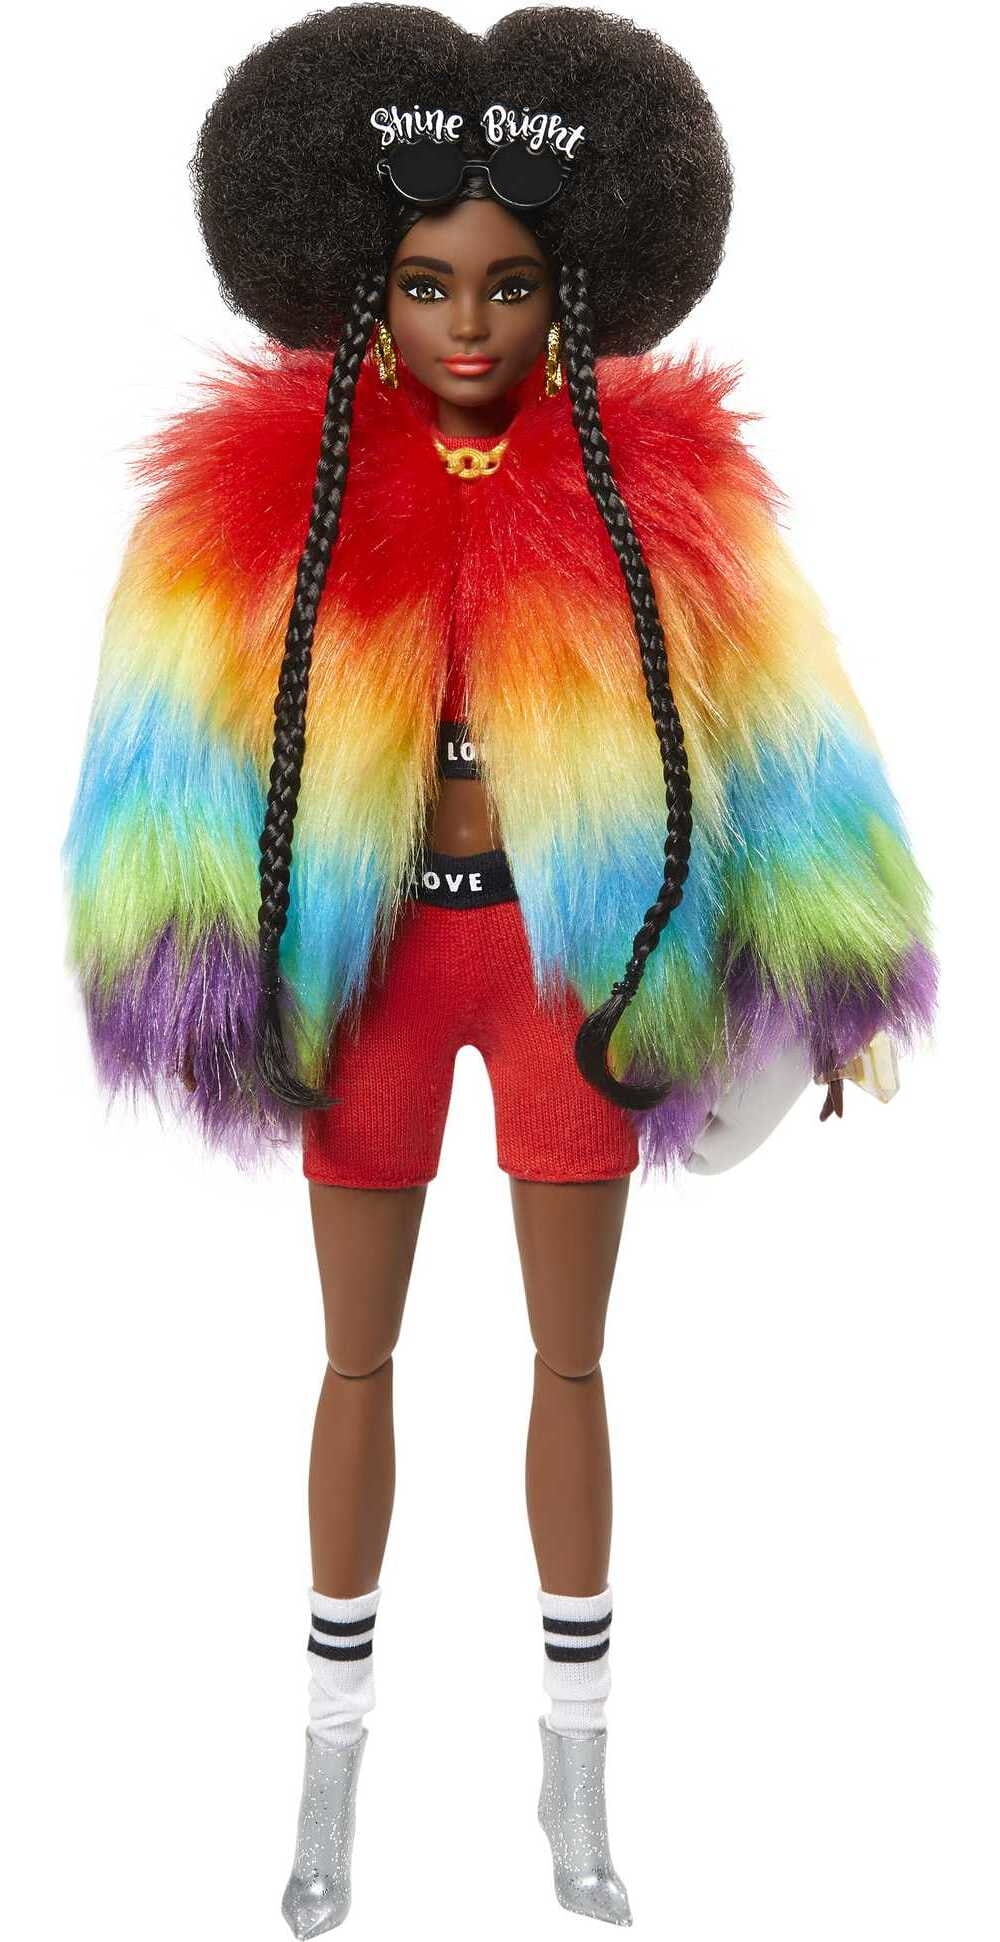 Extra Fashion with Afro-Puffs in Shaggy Rainbow Coat with & - Walmart.com